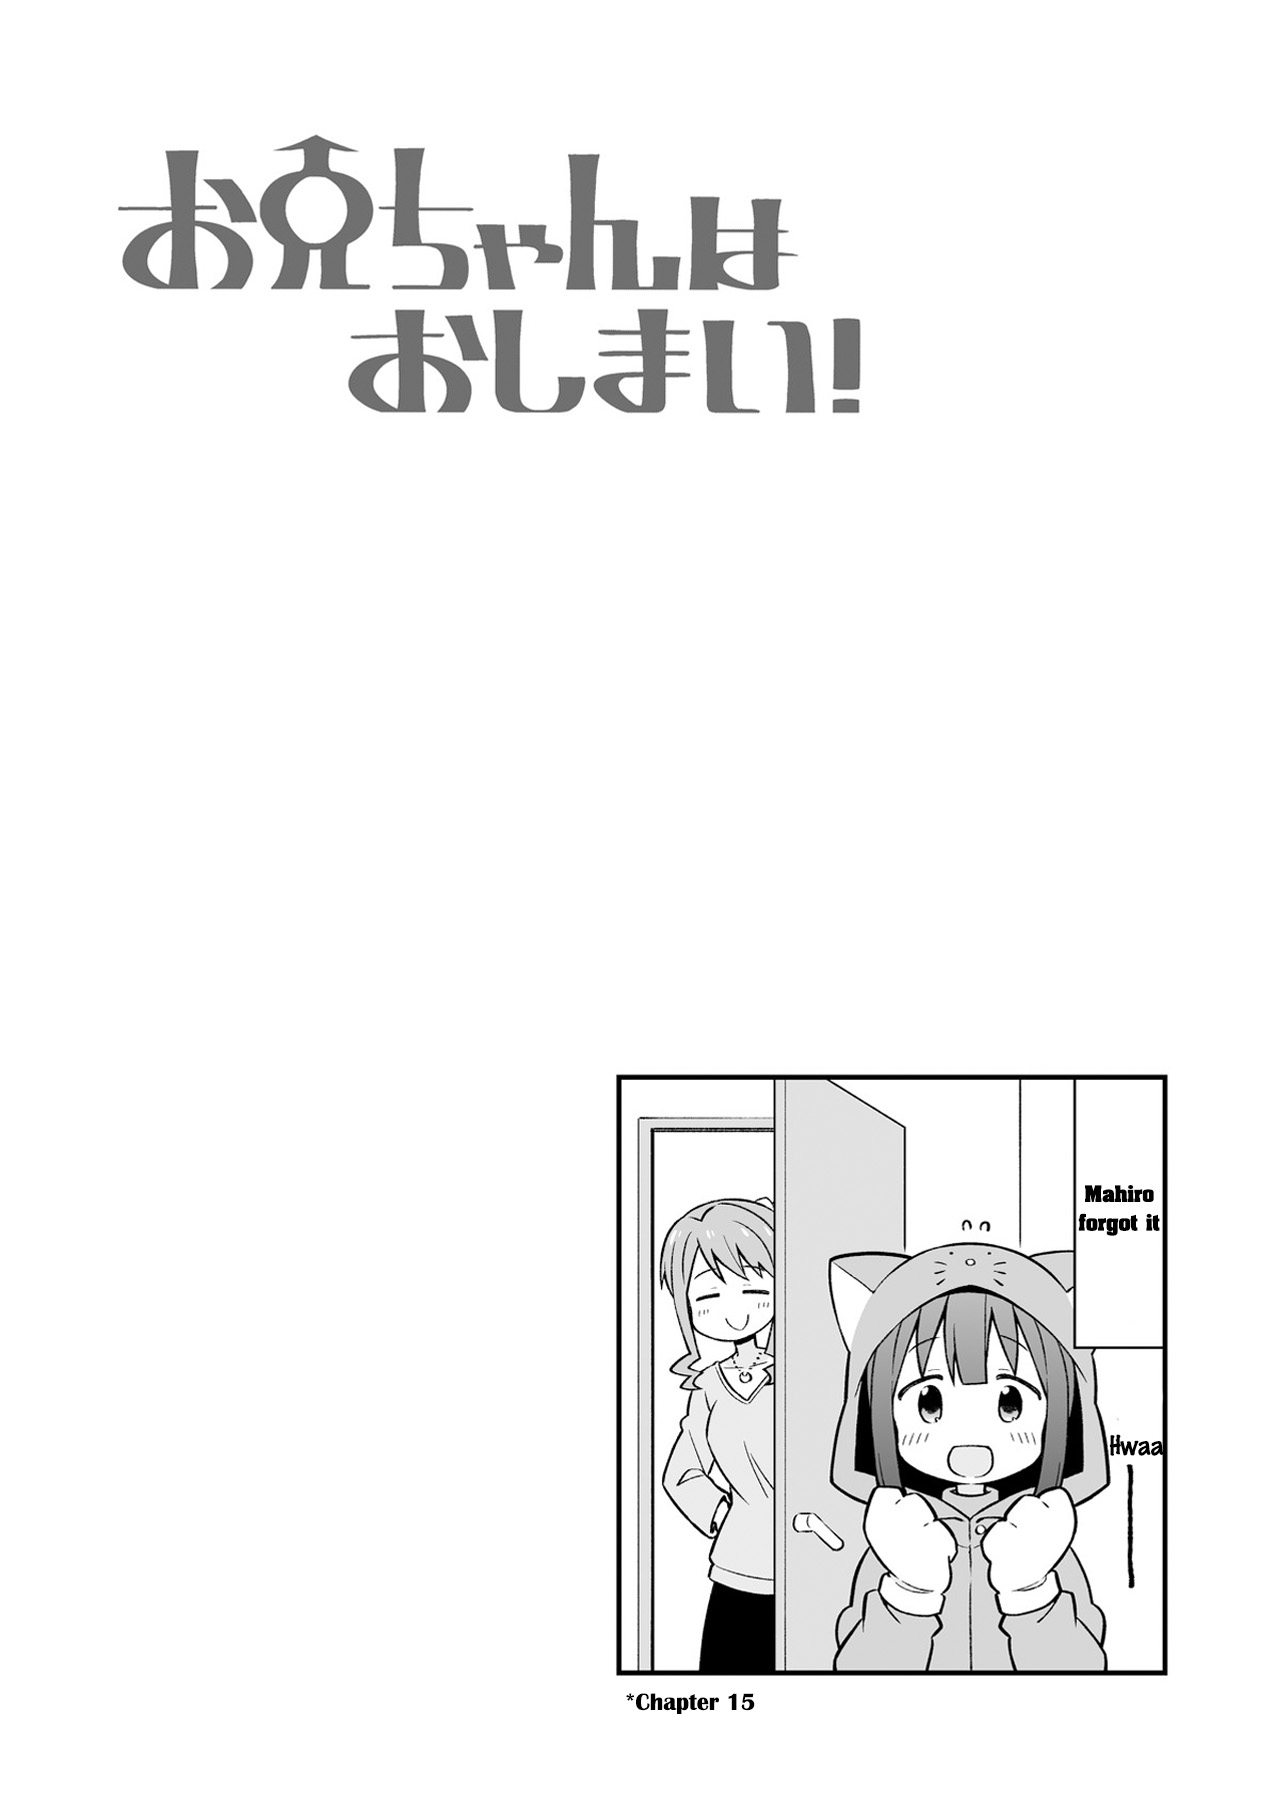 Onii chan is Done For! Vol. 2 Ch. 20.9 Chapter 11 20 Mini Extras